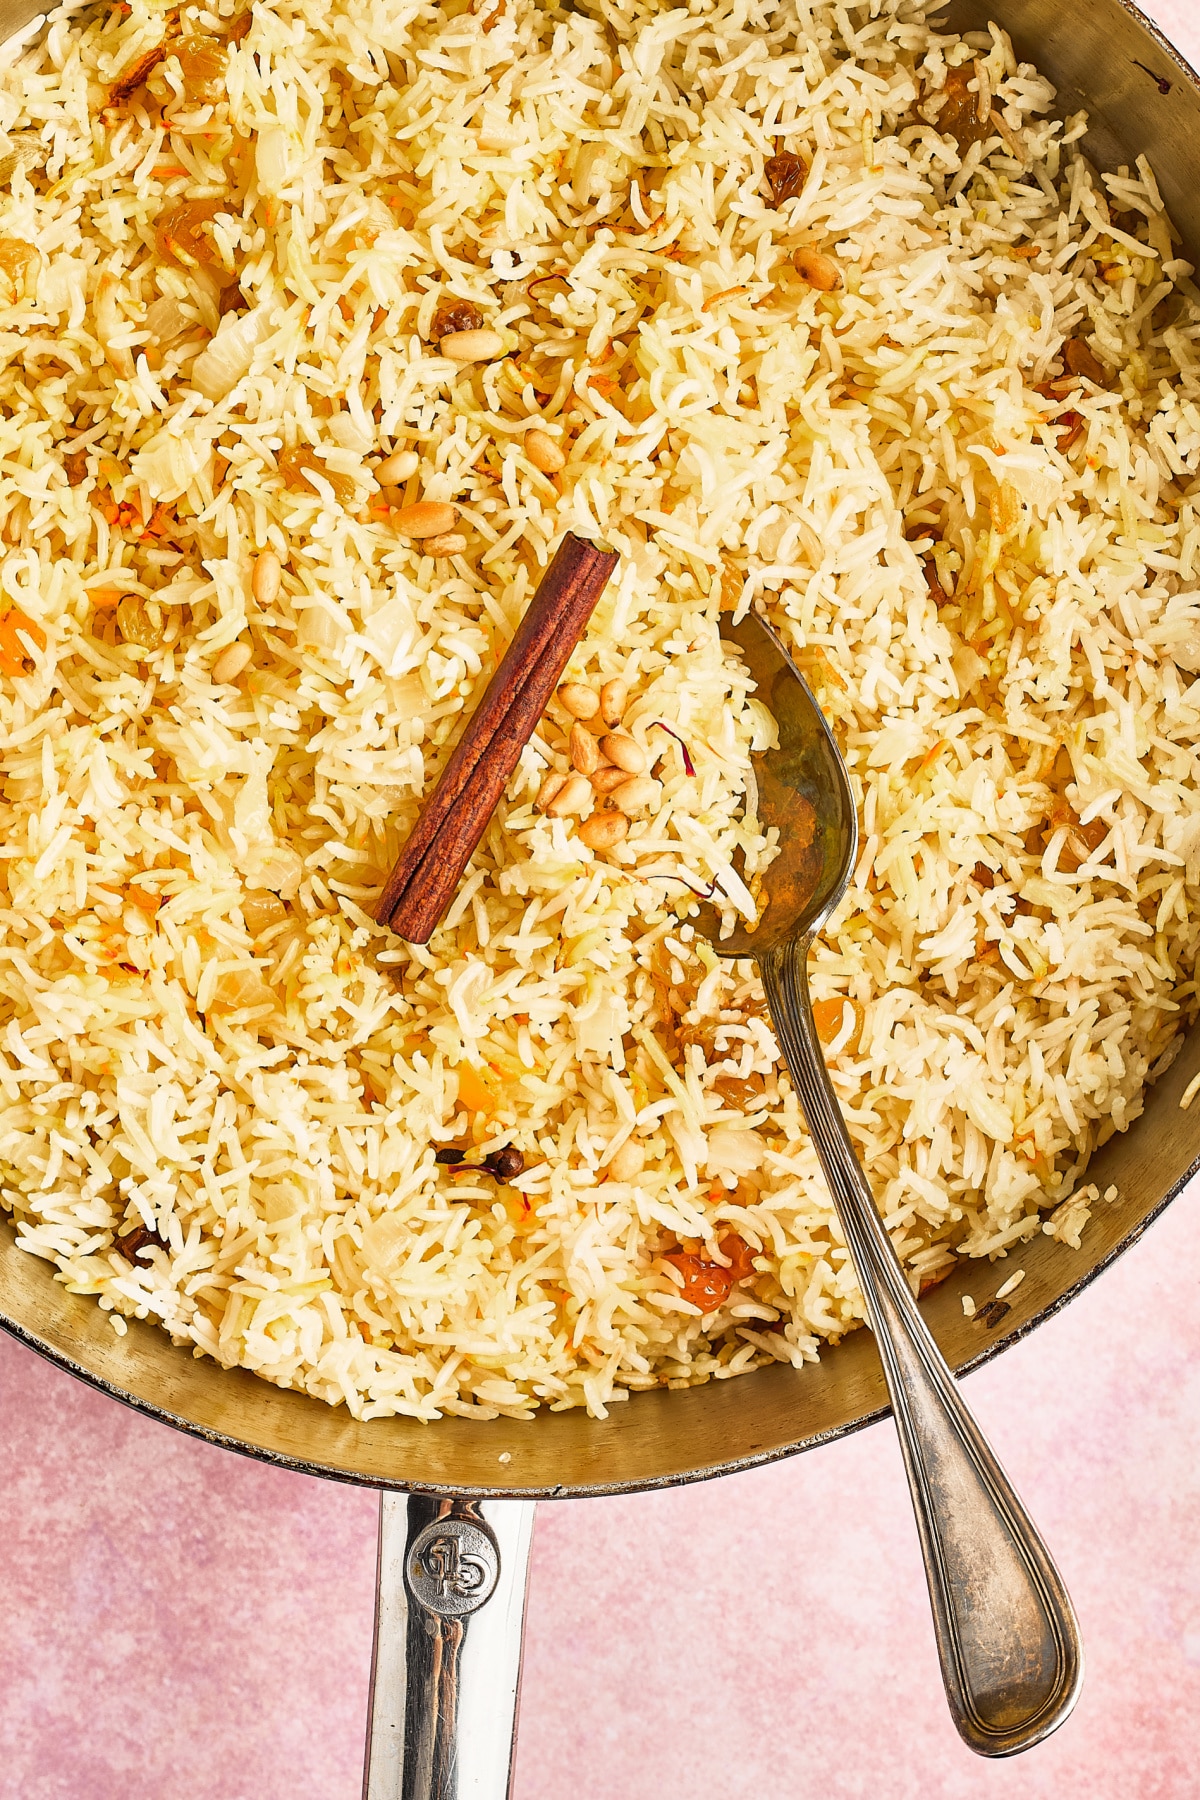 Overhead view of a skillet of yellow saffron rice garnished with golden raisins, pine nuts, a cinnamon stick and saffron strands.